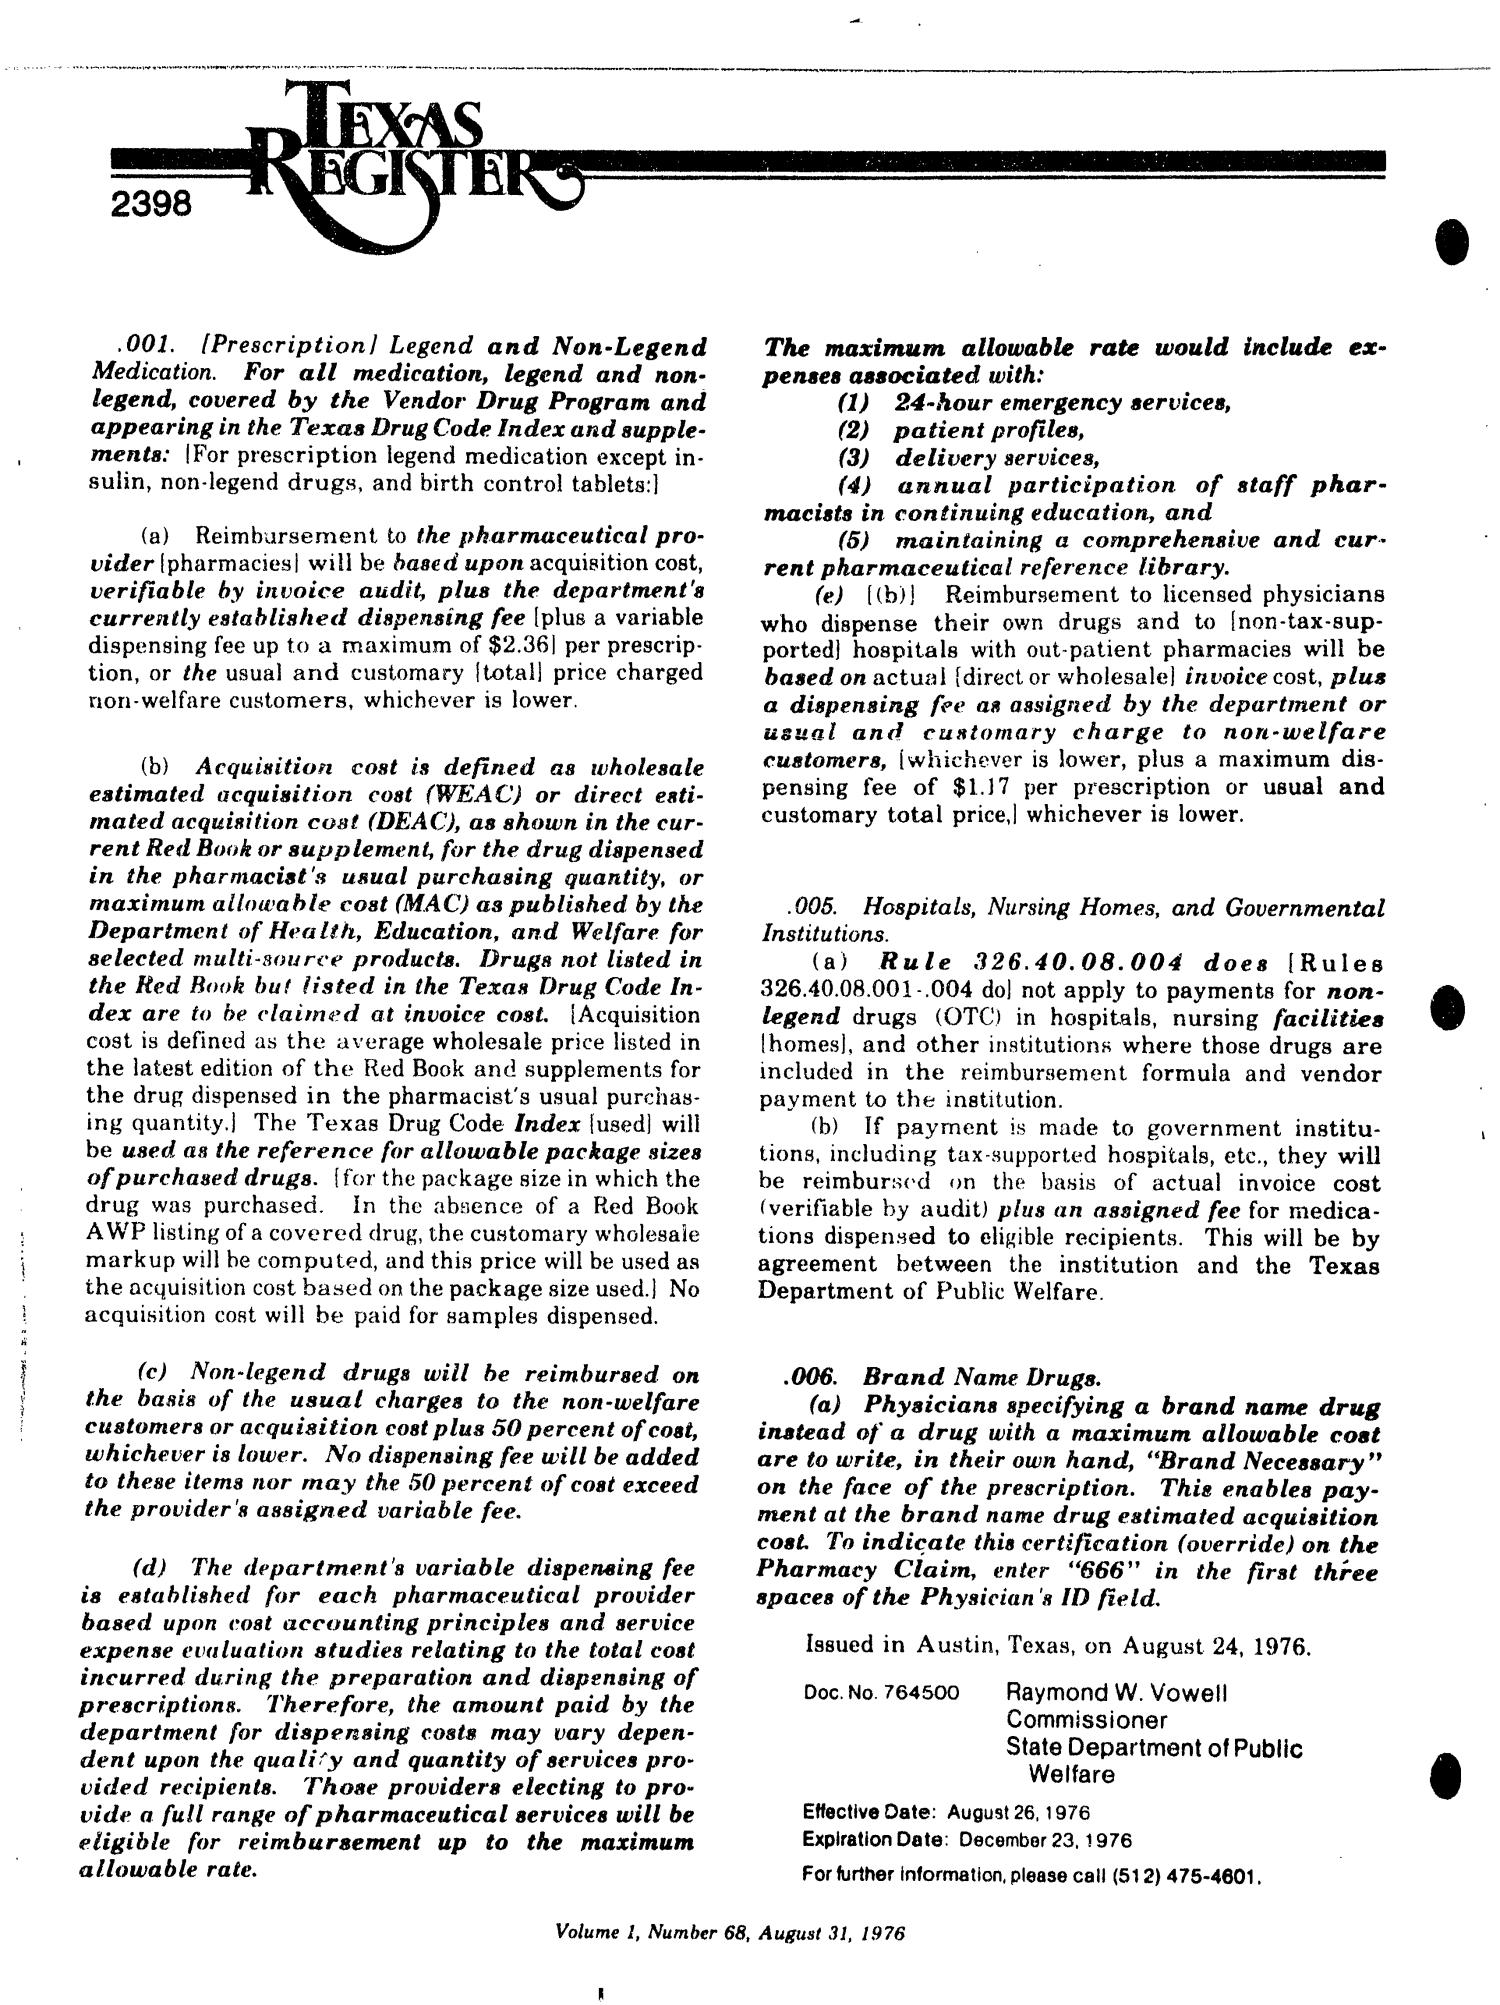 Texas Register, Volume 1, Number 68, Pages 2393-2438, August 31, 1976
                                                
                                                    2398
                                                